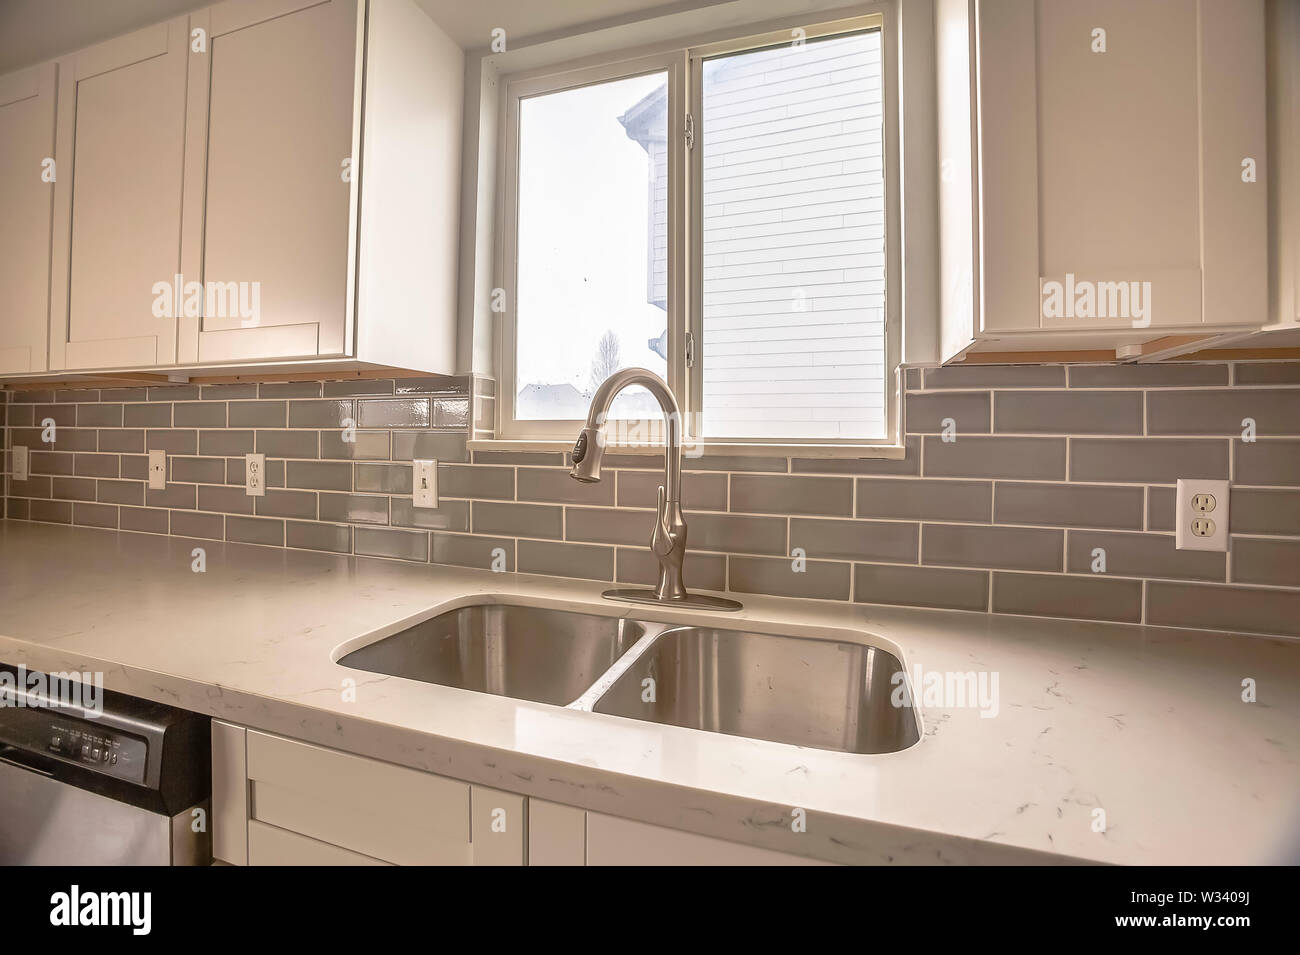 Double Bowl Stainless Steel Sink Against Tiled Wall With Window